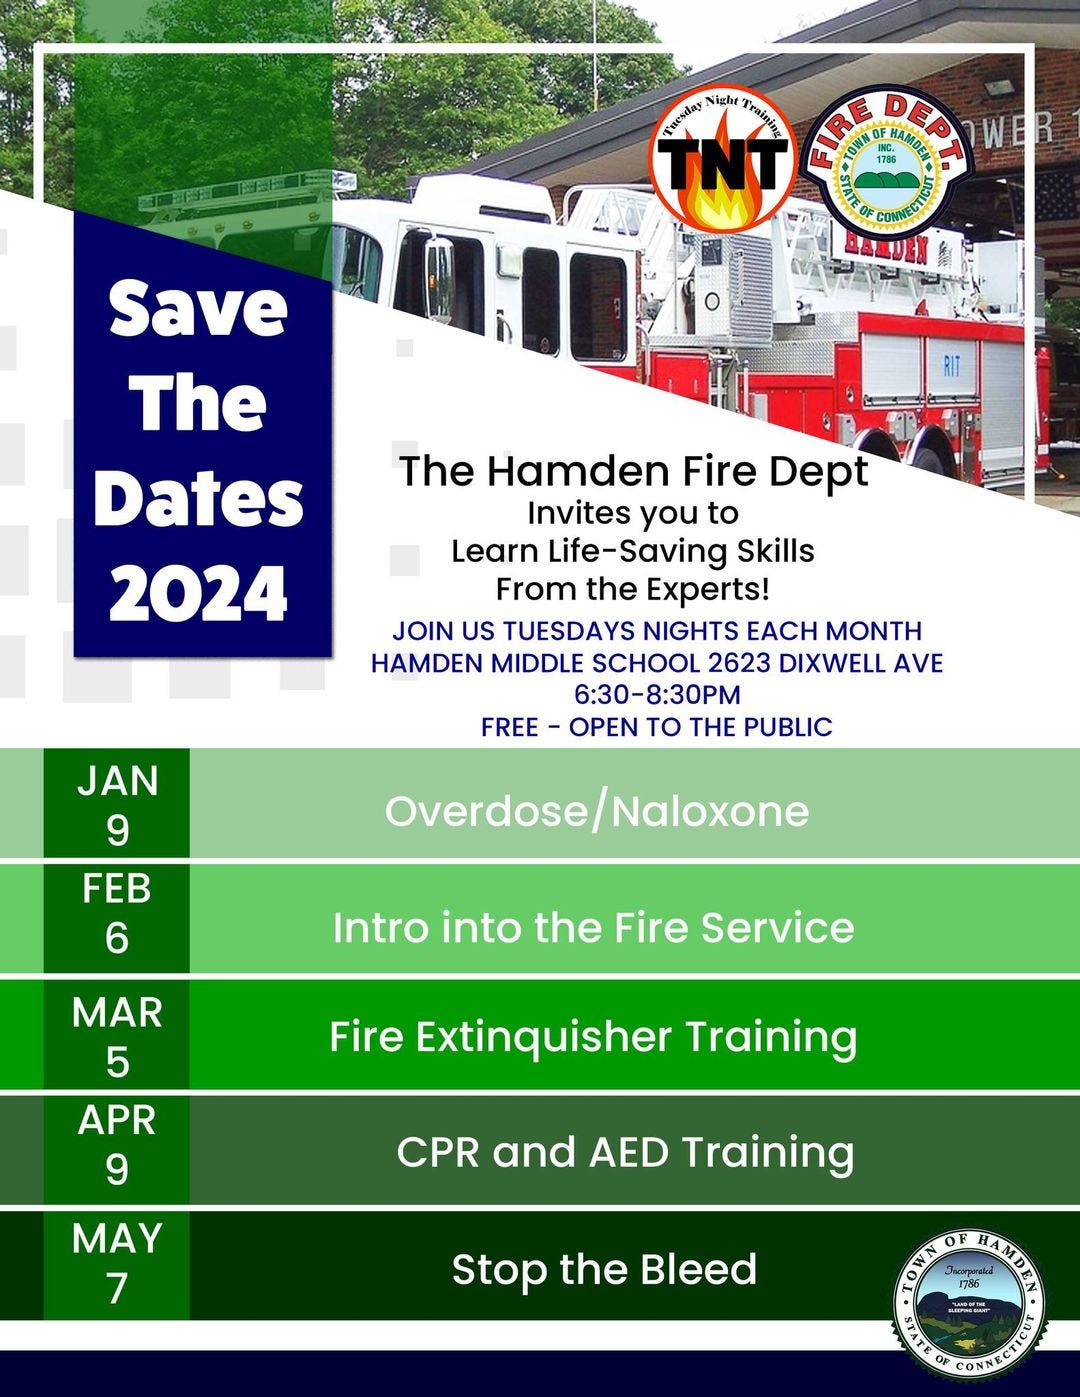 May be an image of ambulance and text that says 'Night raimin Save The Dates 2024 The Hamden Fire Dept Invites you to Learn Life-Saving Skills From the Experts! JOIN US TUESDAYS NIGHTS EACH MONTH HAMDEN MIDDLE SCHOOL 2623 DIXWELL AVE 6:30-8:30PM FREE OPEN TO THE PUBLIC JAN 9 FEB 6 Overdose/Naloxone Intro into the Fire Service MAR 5 APR 9 Fire Extinquisher Training CPR and AED Training MAY 7 Stop the Bleed'